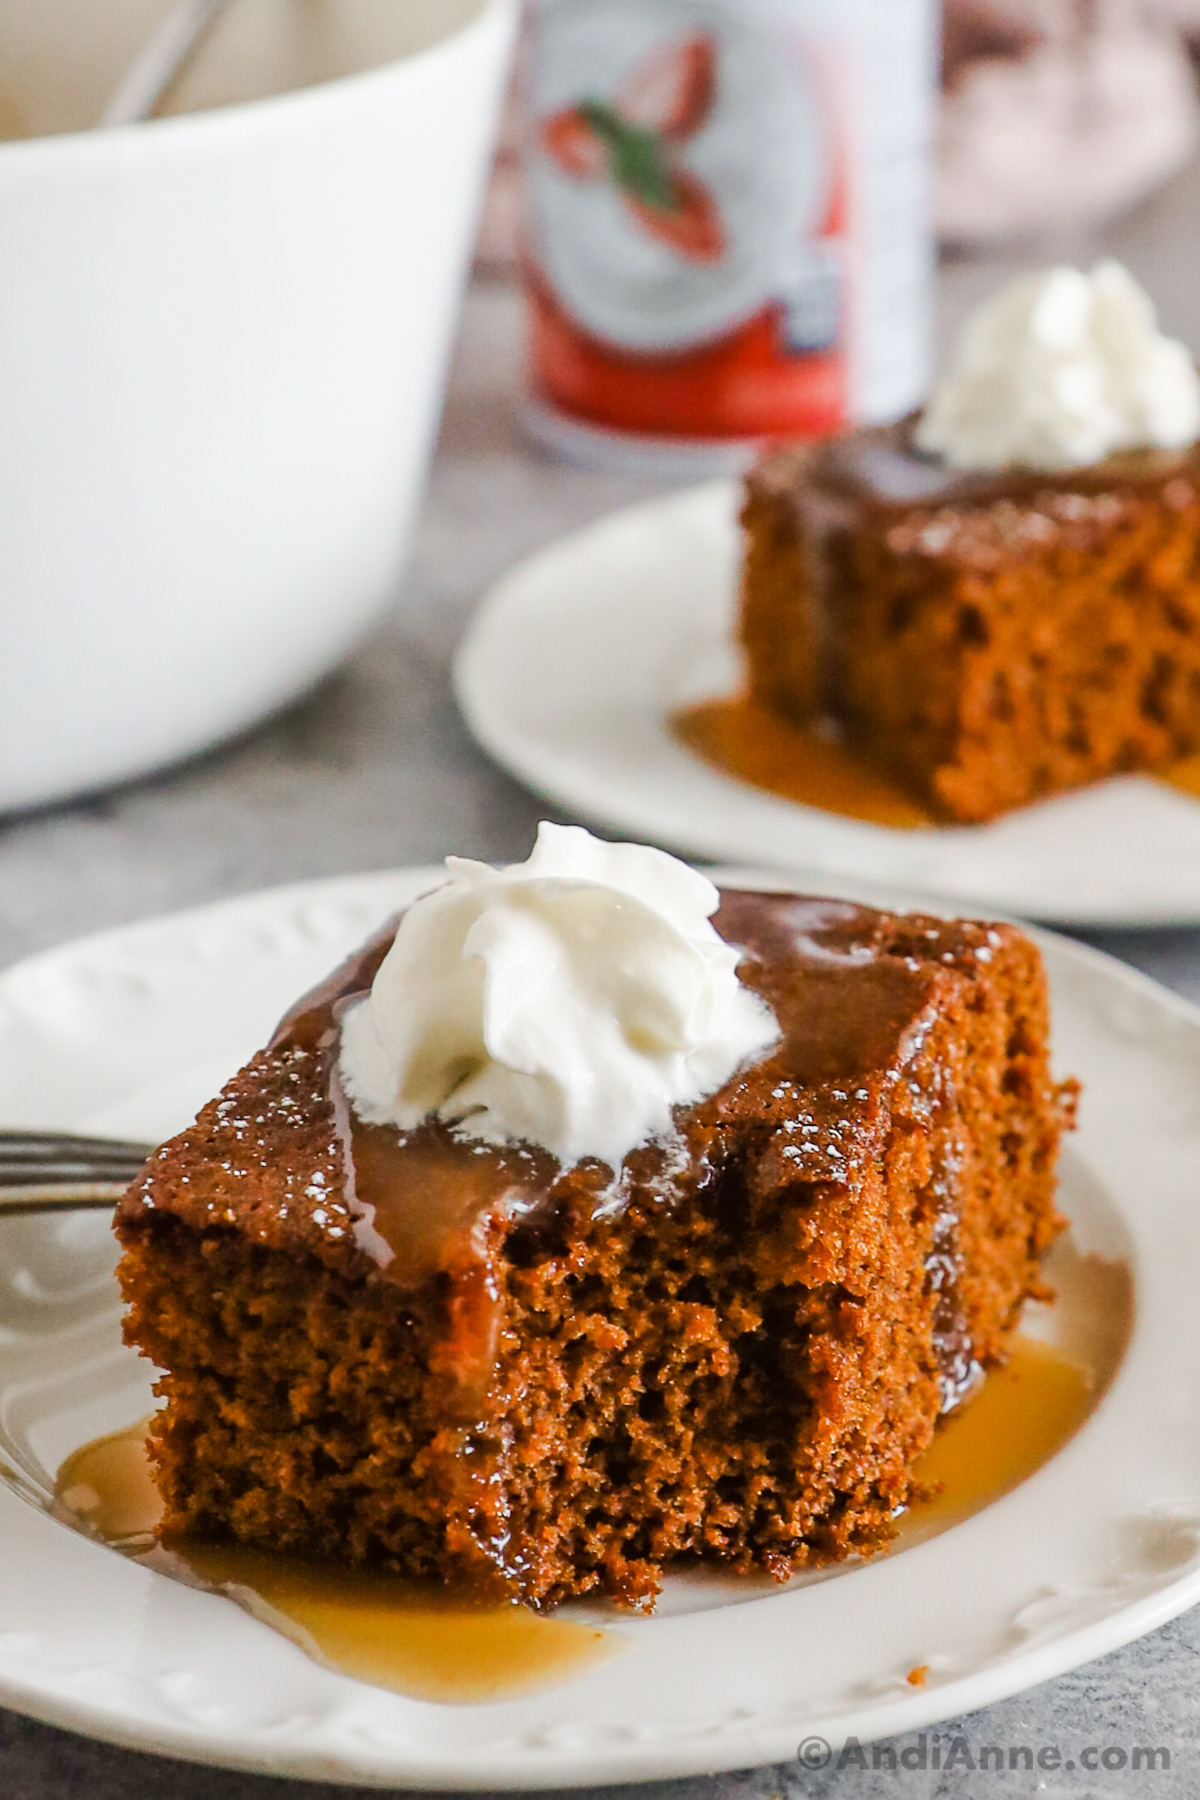 Slices of gingerbread cake topped with caramel sauce and whipped cream.